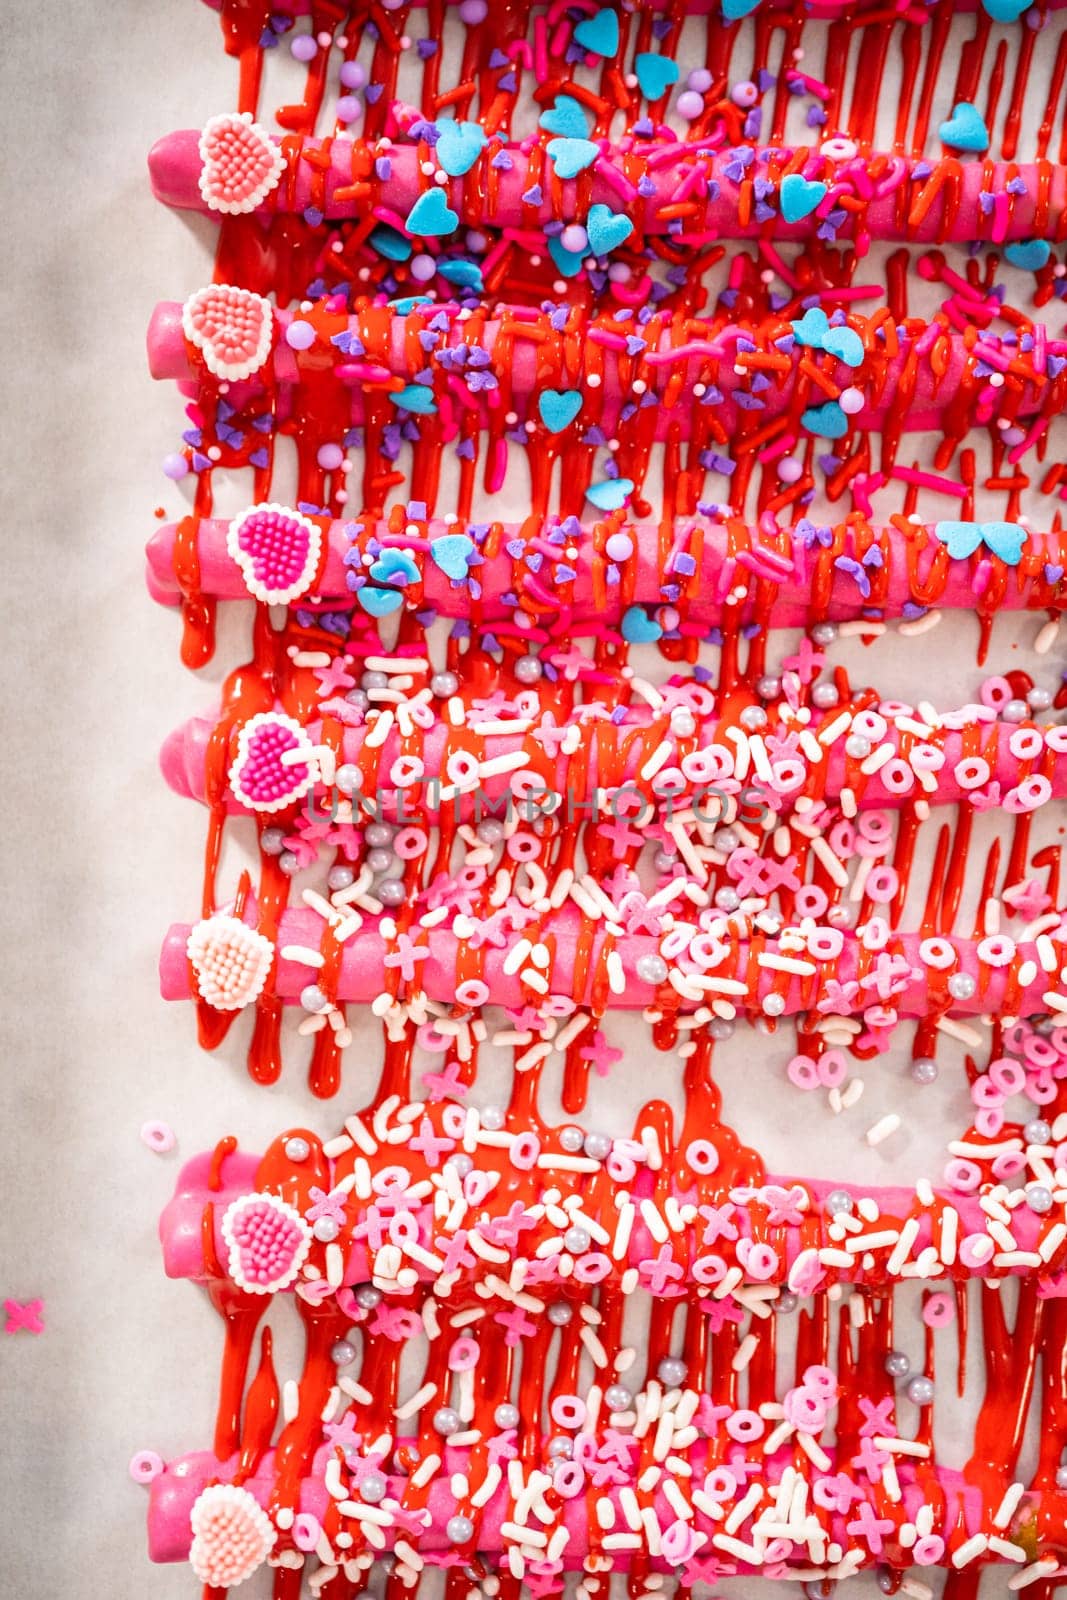 Drizzling melted chocolate over chocolate-dipped pretzels rods and decorating with sprinkles to make chocolate-covered pretzel rods for Valentine's Day.